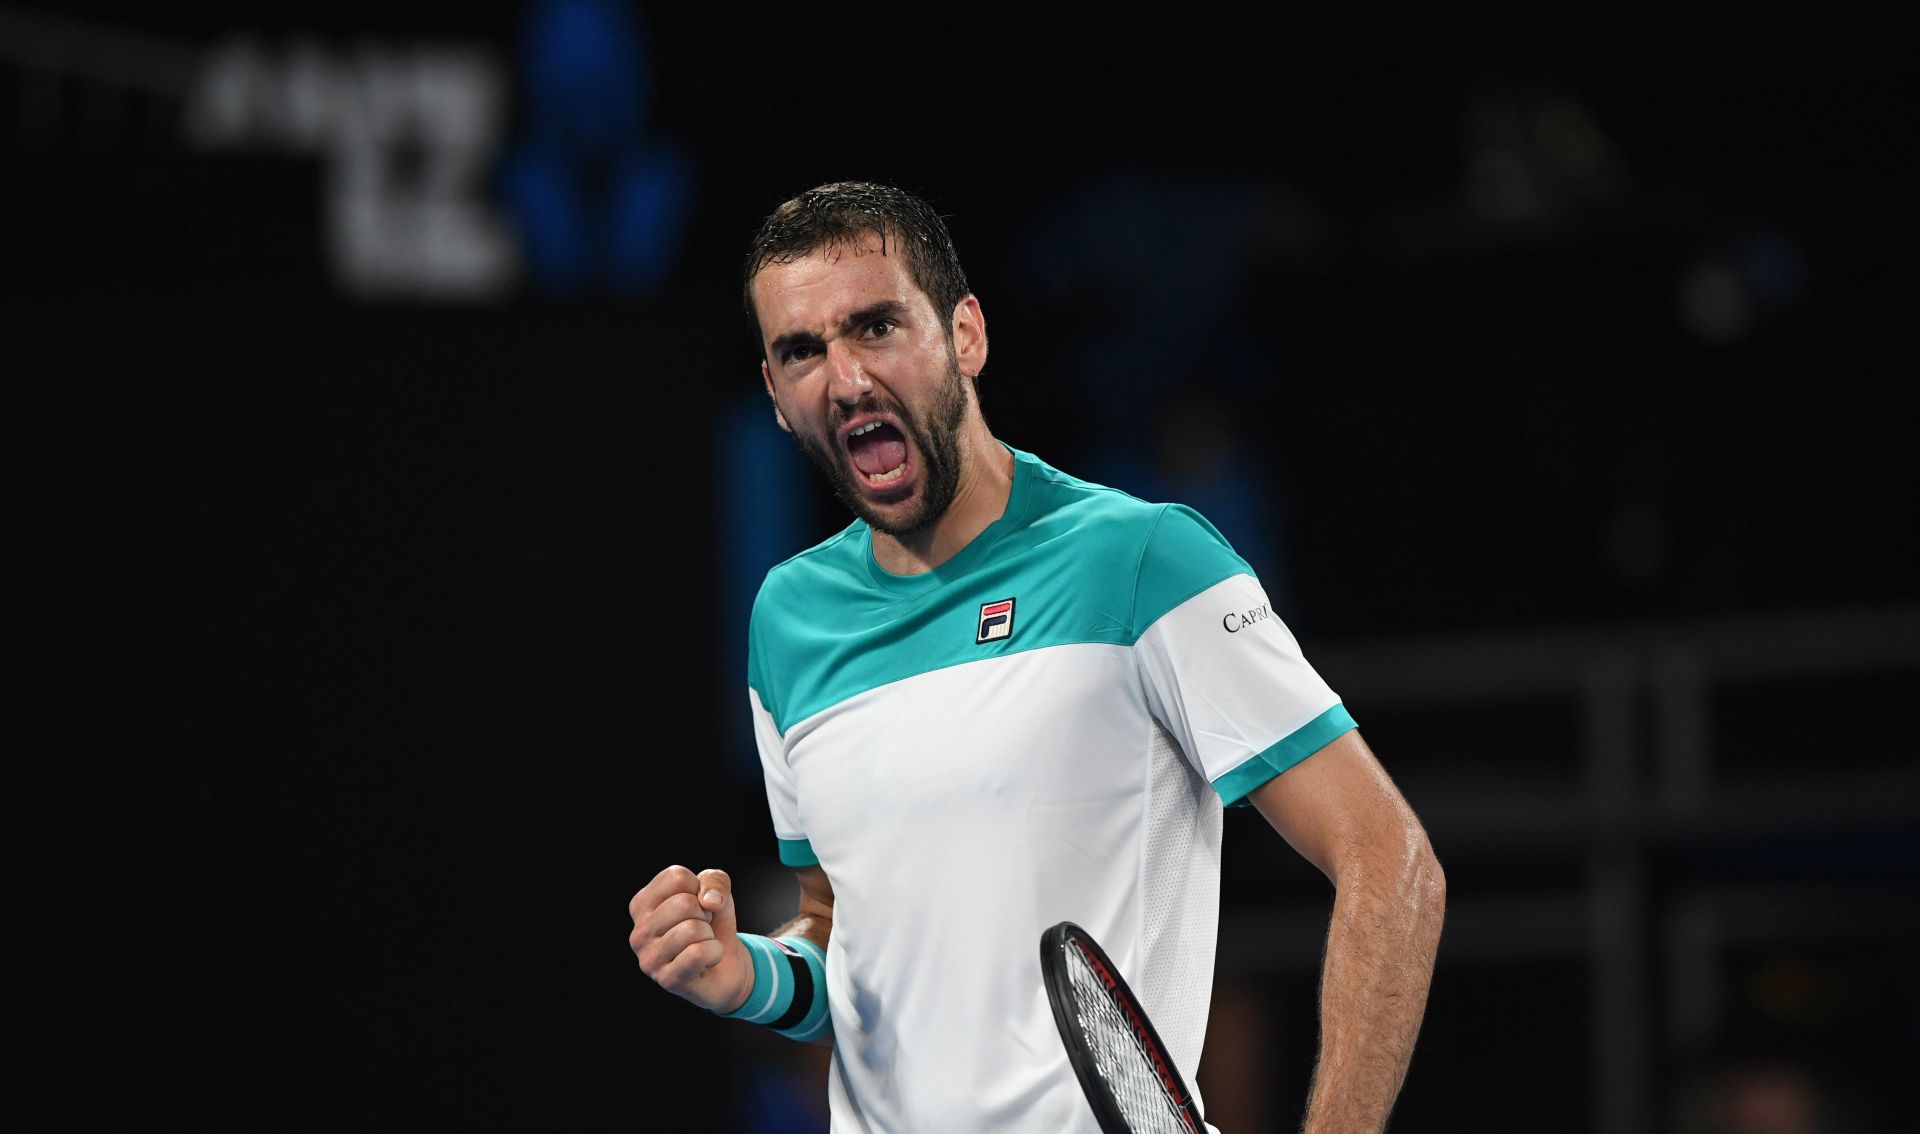 epa06453261 Marin Cilic of Croatia reacts during his third round match against Ryan Harrison of the United States at the Australian Open tennis tournament in Melbourne, Victoria, Australia, 19 January 2018.  EPA/JOE CASTRO  AUSTRALIA AND NEW ZEALAND OUT